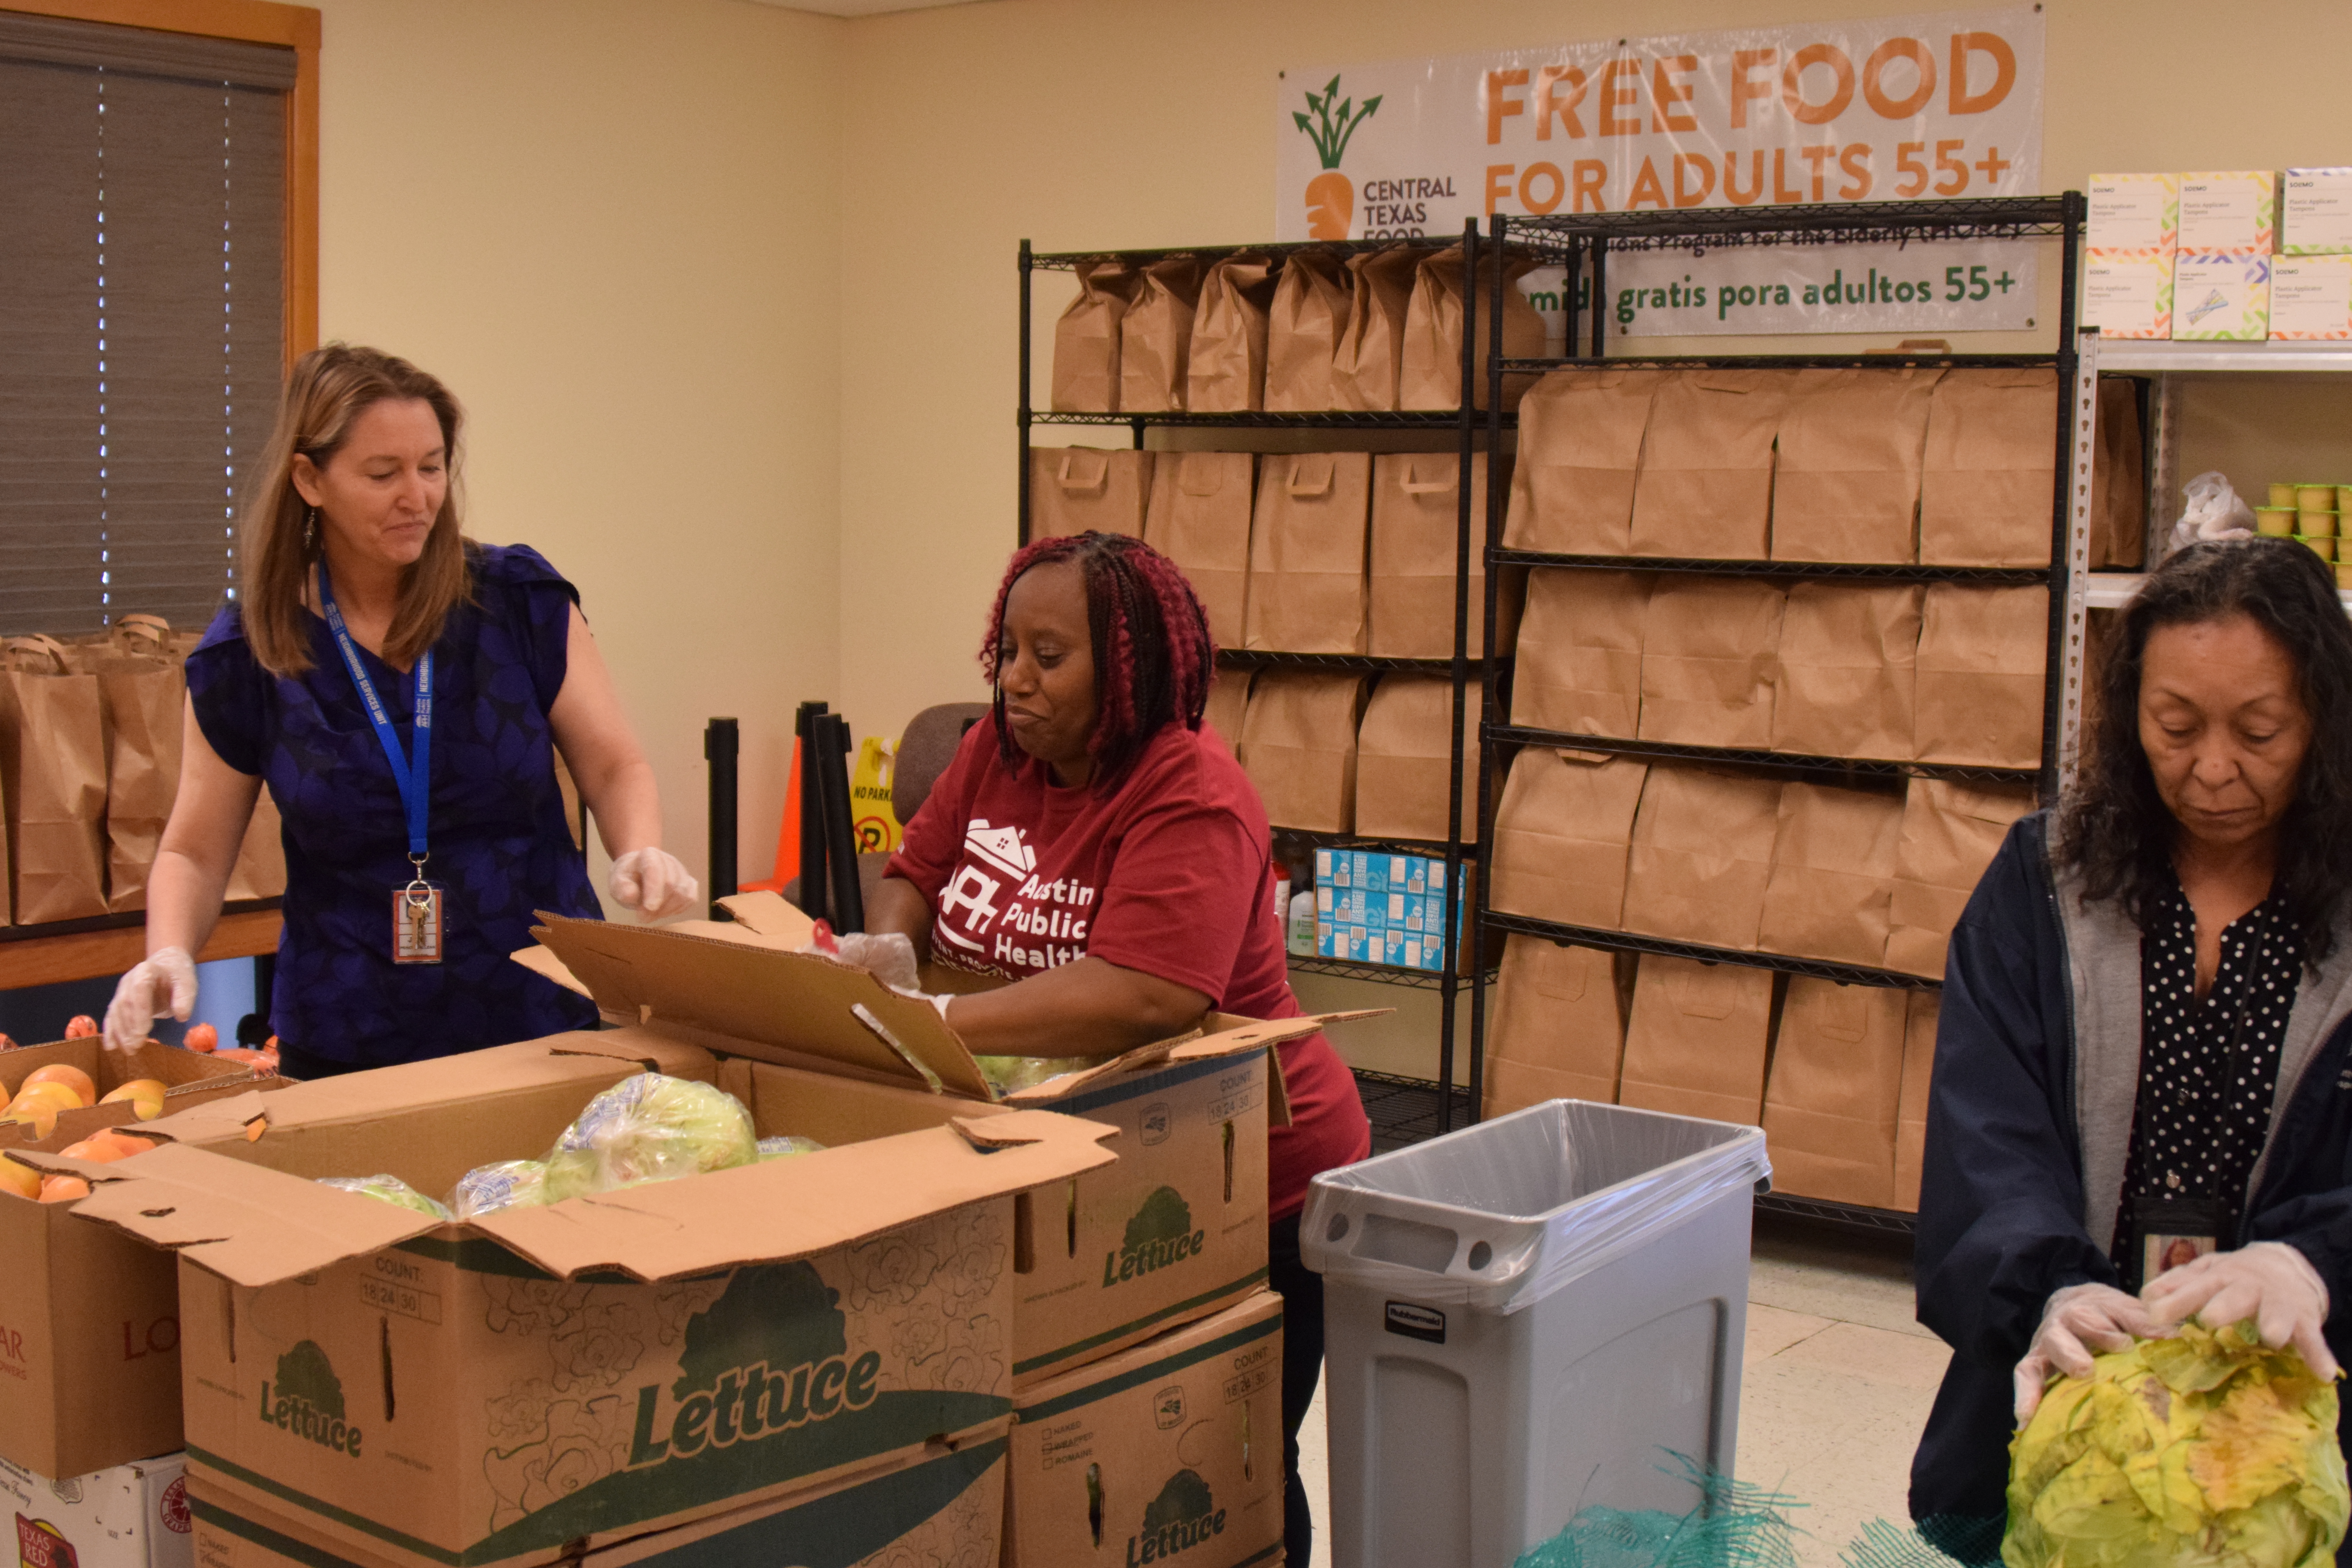 The team at the South Austin Neighborhood Center preparing packages of food for the community.